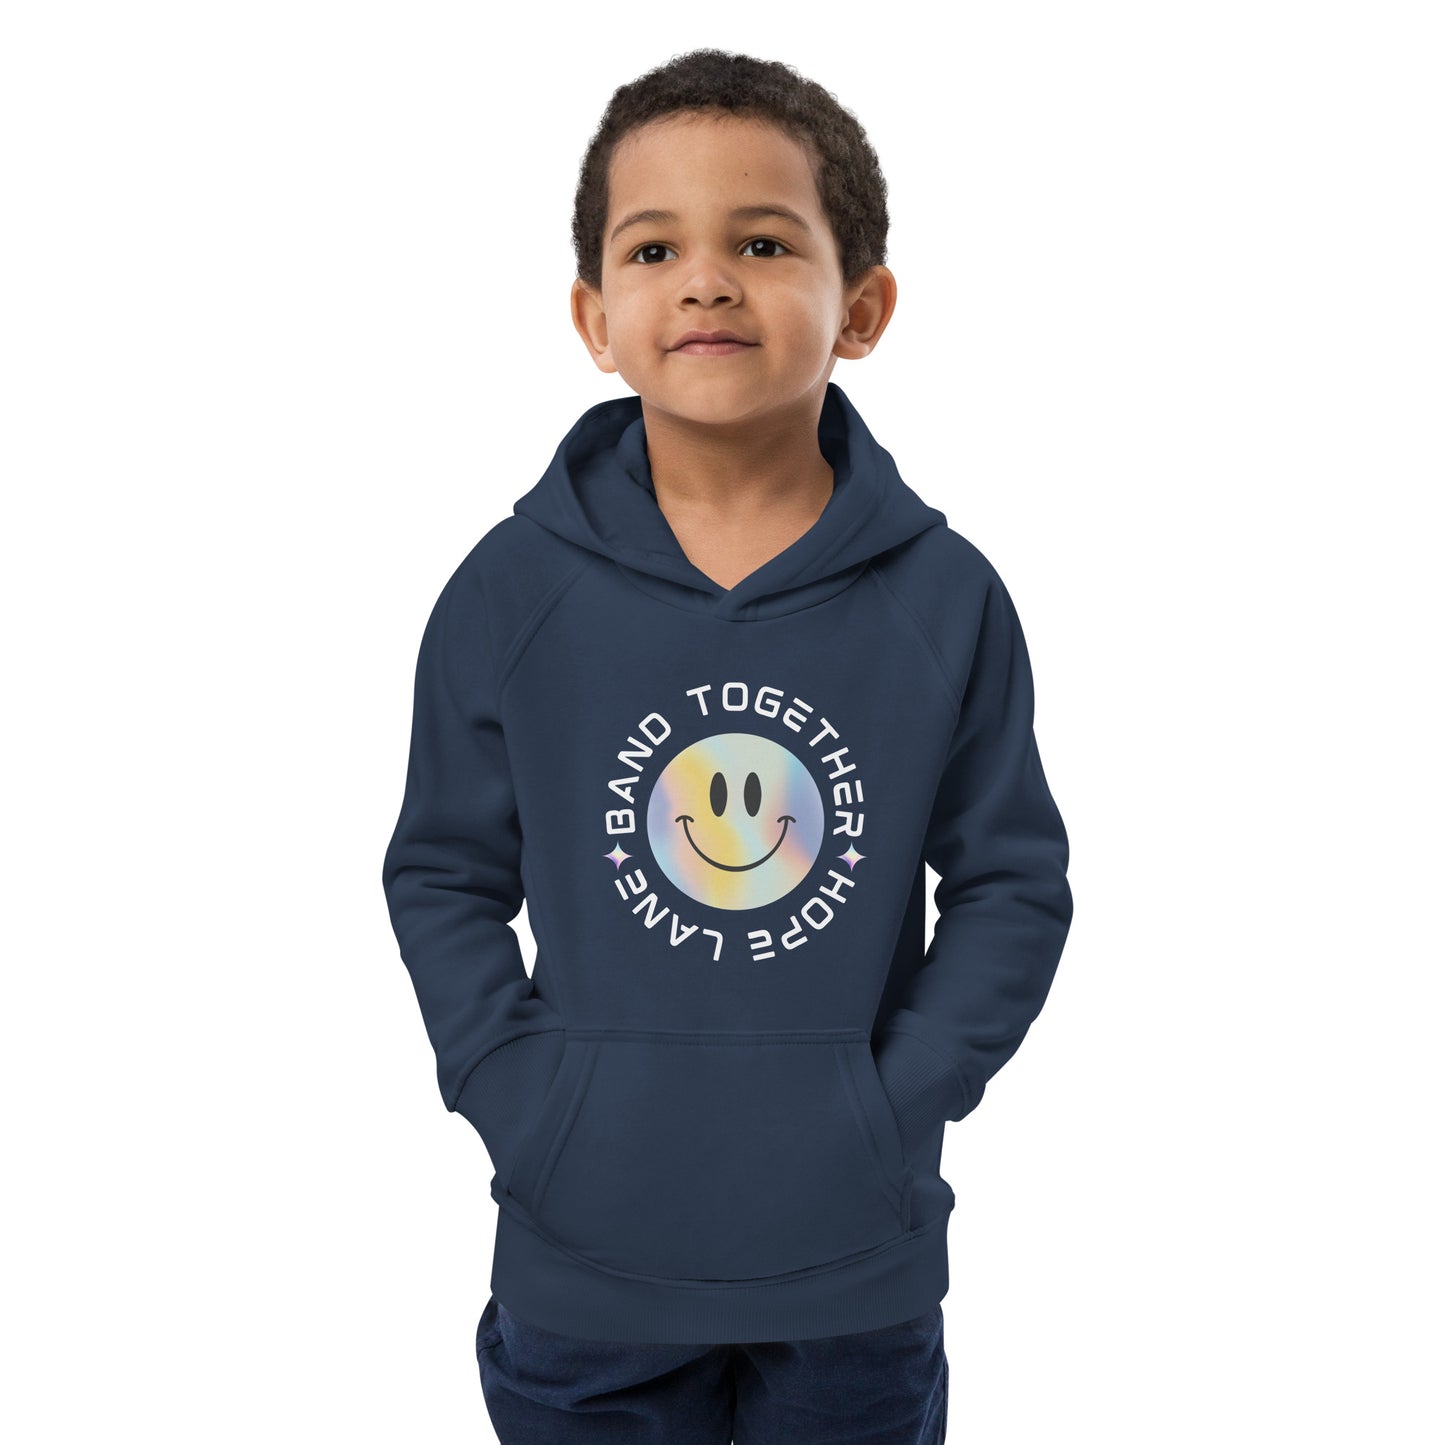 'Band Together' Kids eco hoodie (official Hope Lane merch)